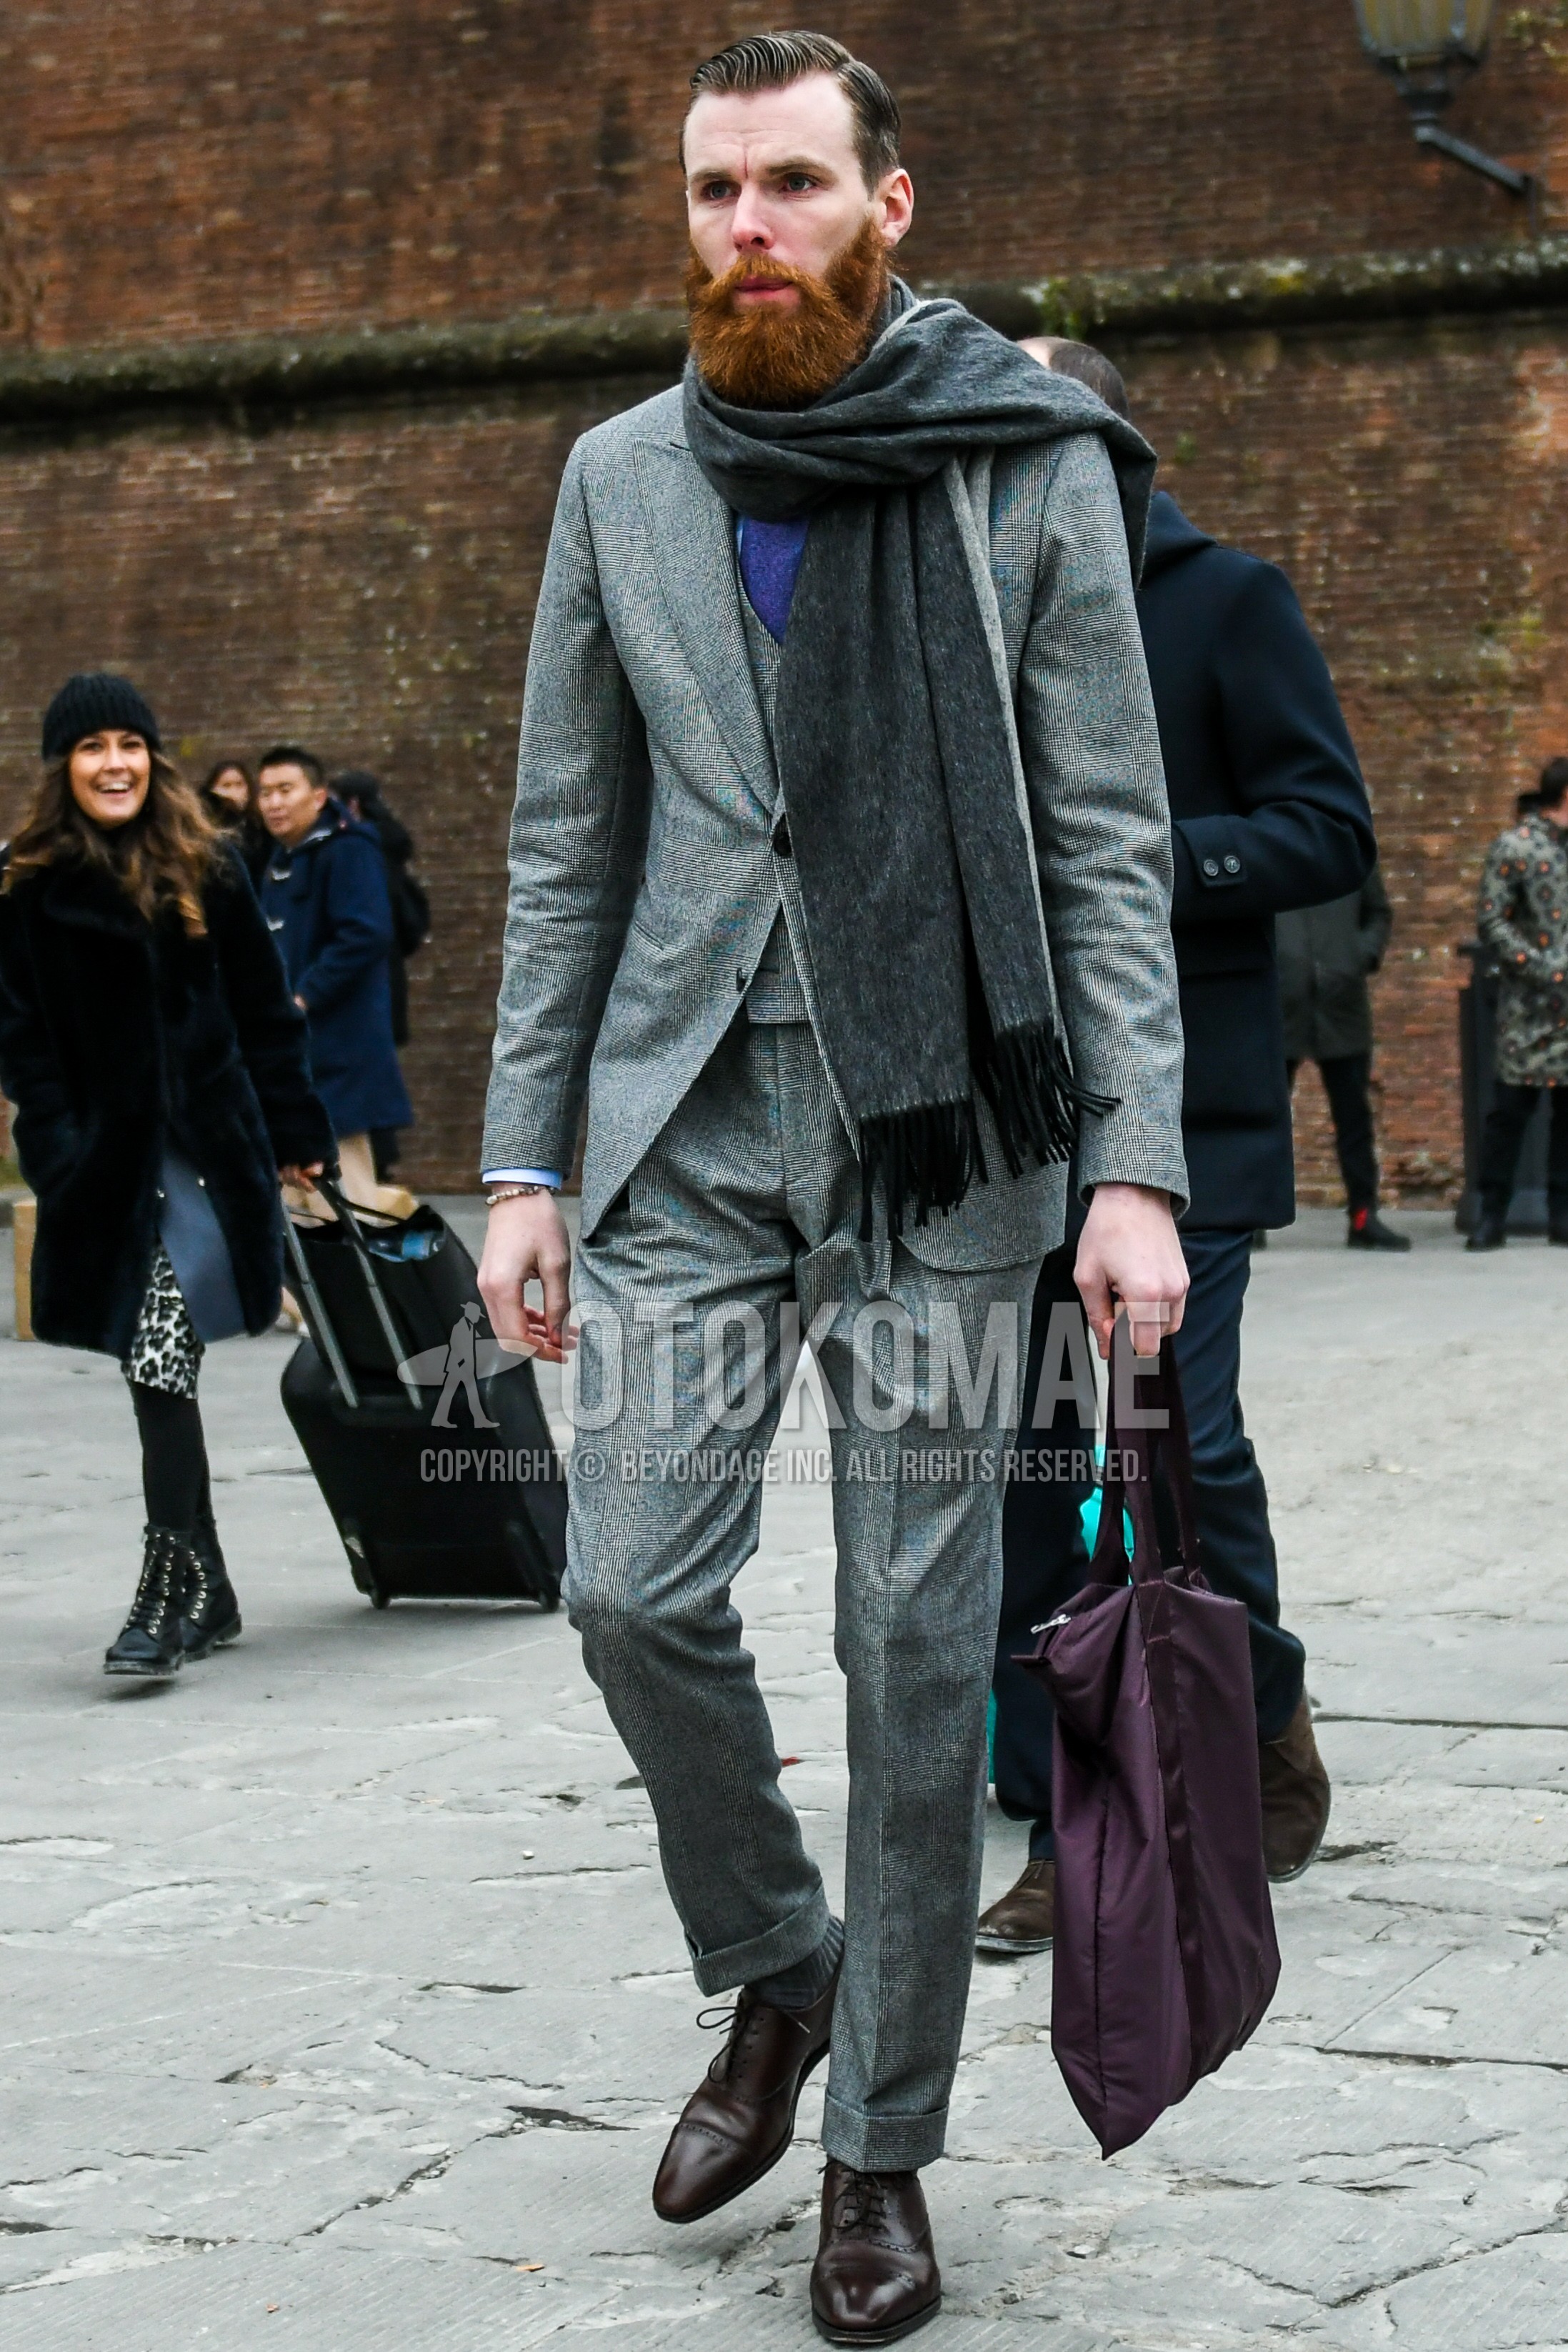 Men's autumn winter outfit with gray plain scarf, gray plain sweater, gray stripes socks, brown straight-tip shoes leather shoes, purple plain briefcase/handbag, gray check three-piece suit.